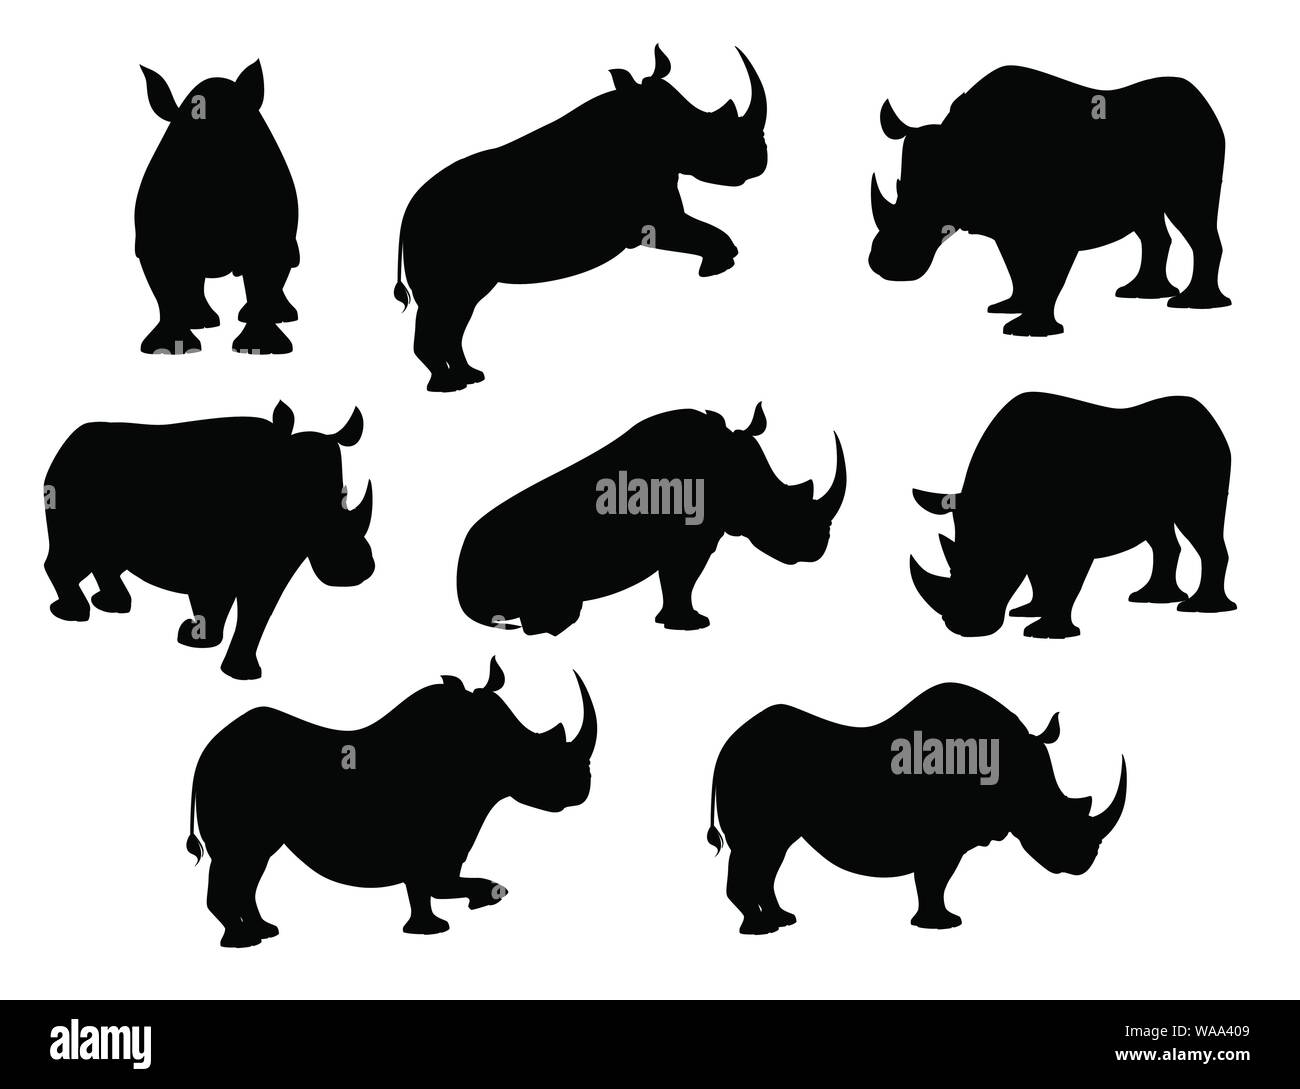 Black silhouette african rhinoceros in different poses cartoon animal design flat vector illustration isolated on white background. Stock Vector